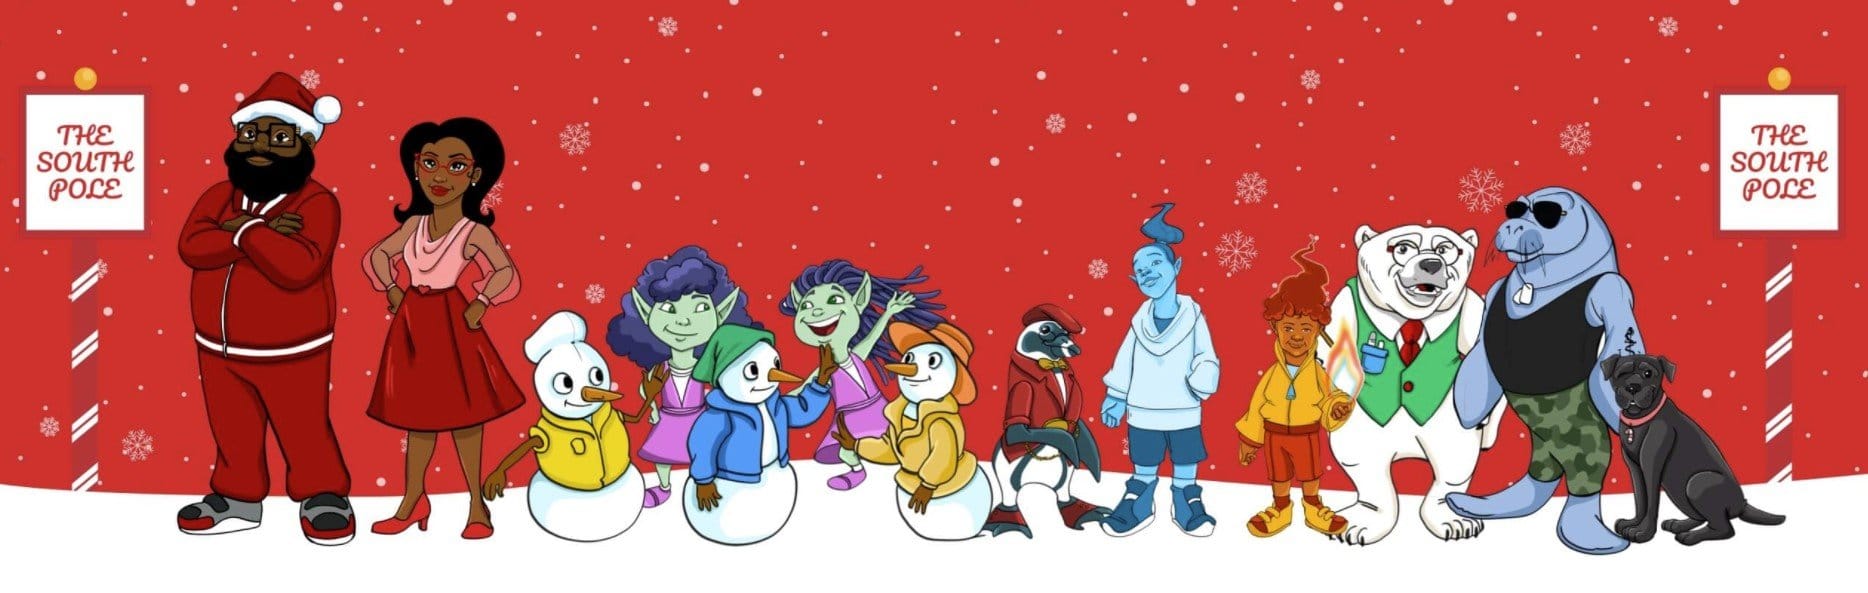 Screengrab from Black Santa Website Showing cast of characters